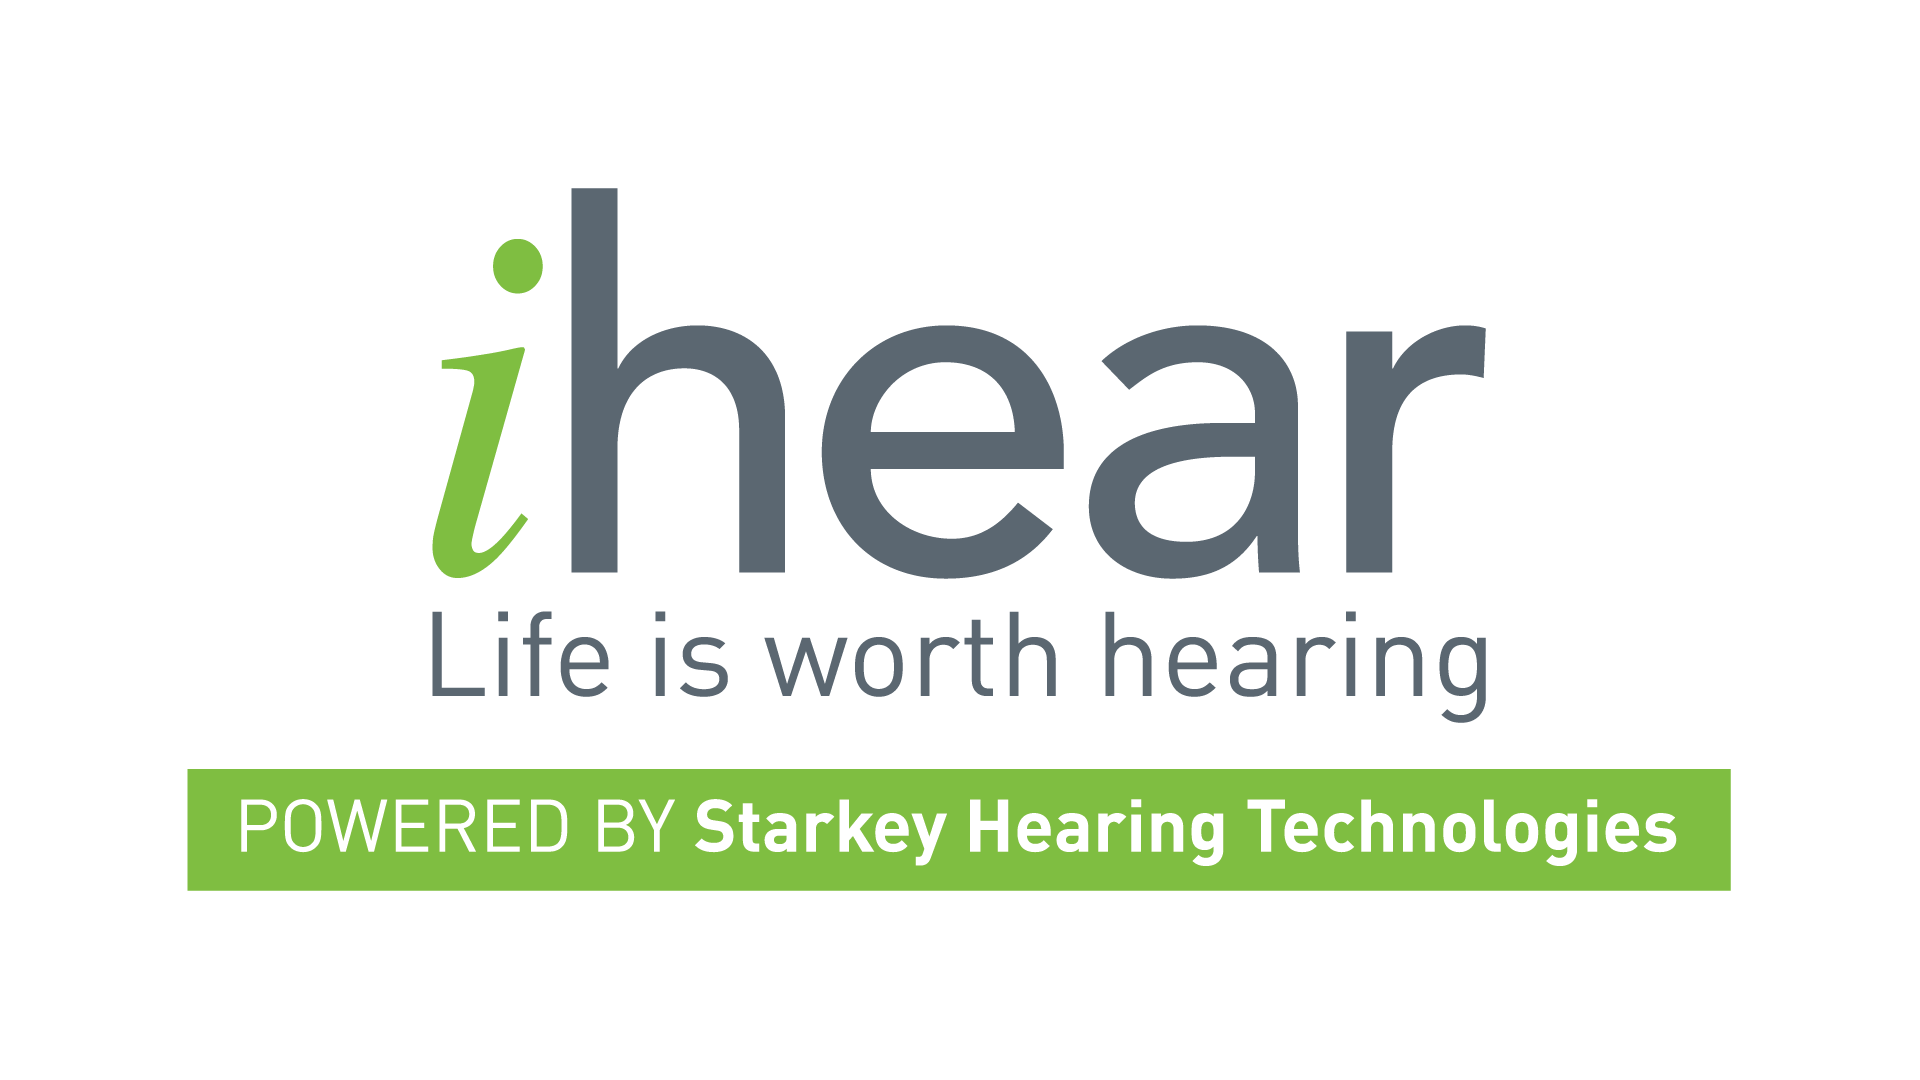 Hearing loss affects more than just your hearing logo